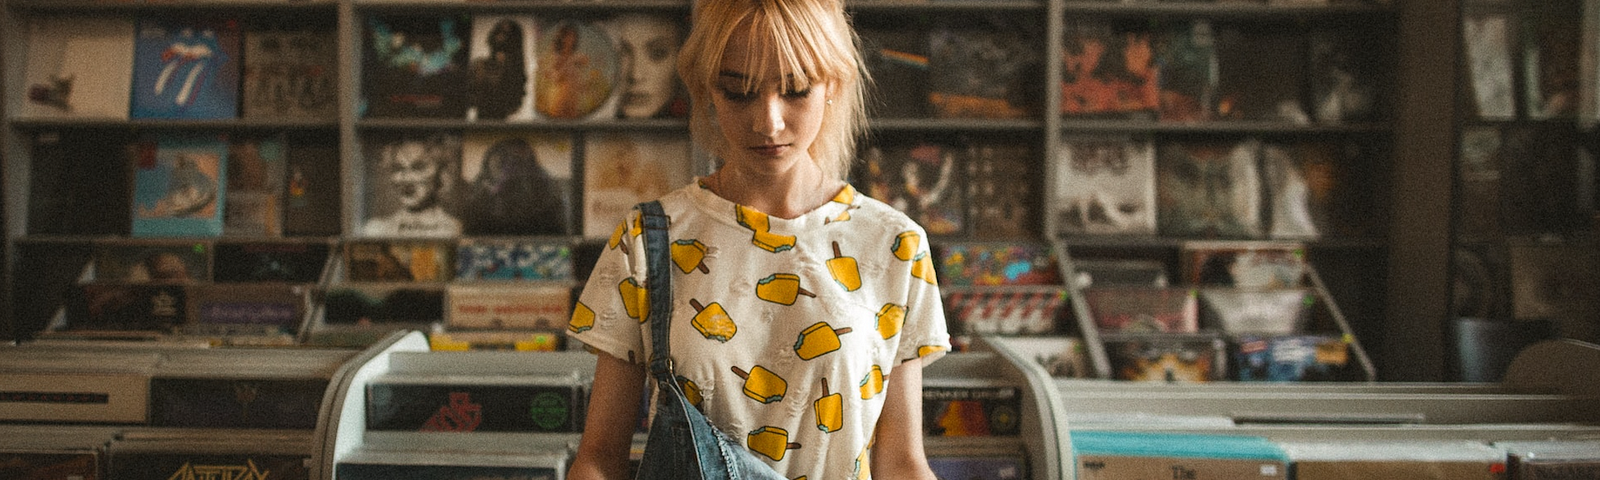 A young woman looking at a record in a record store